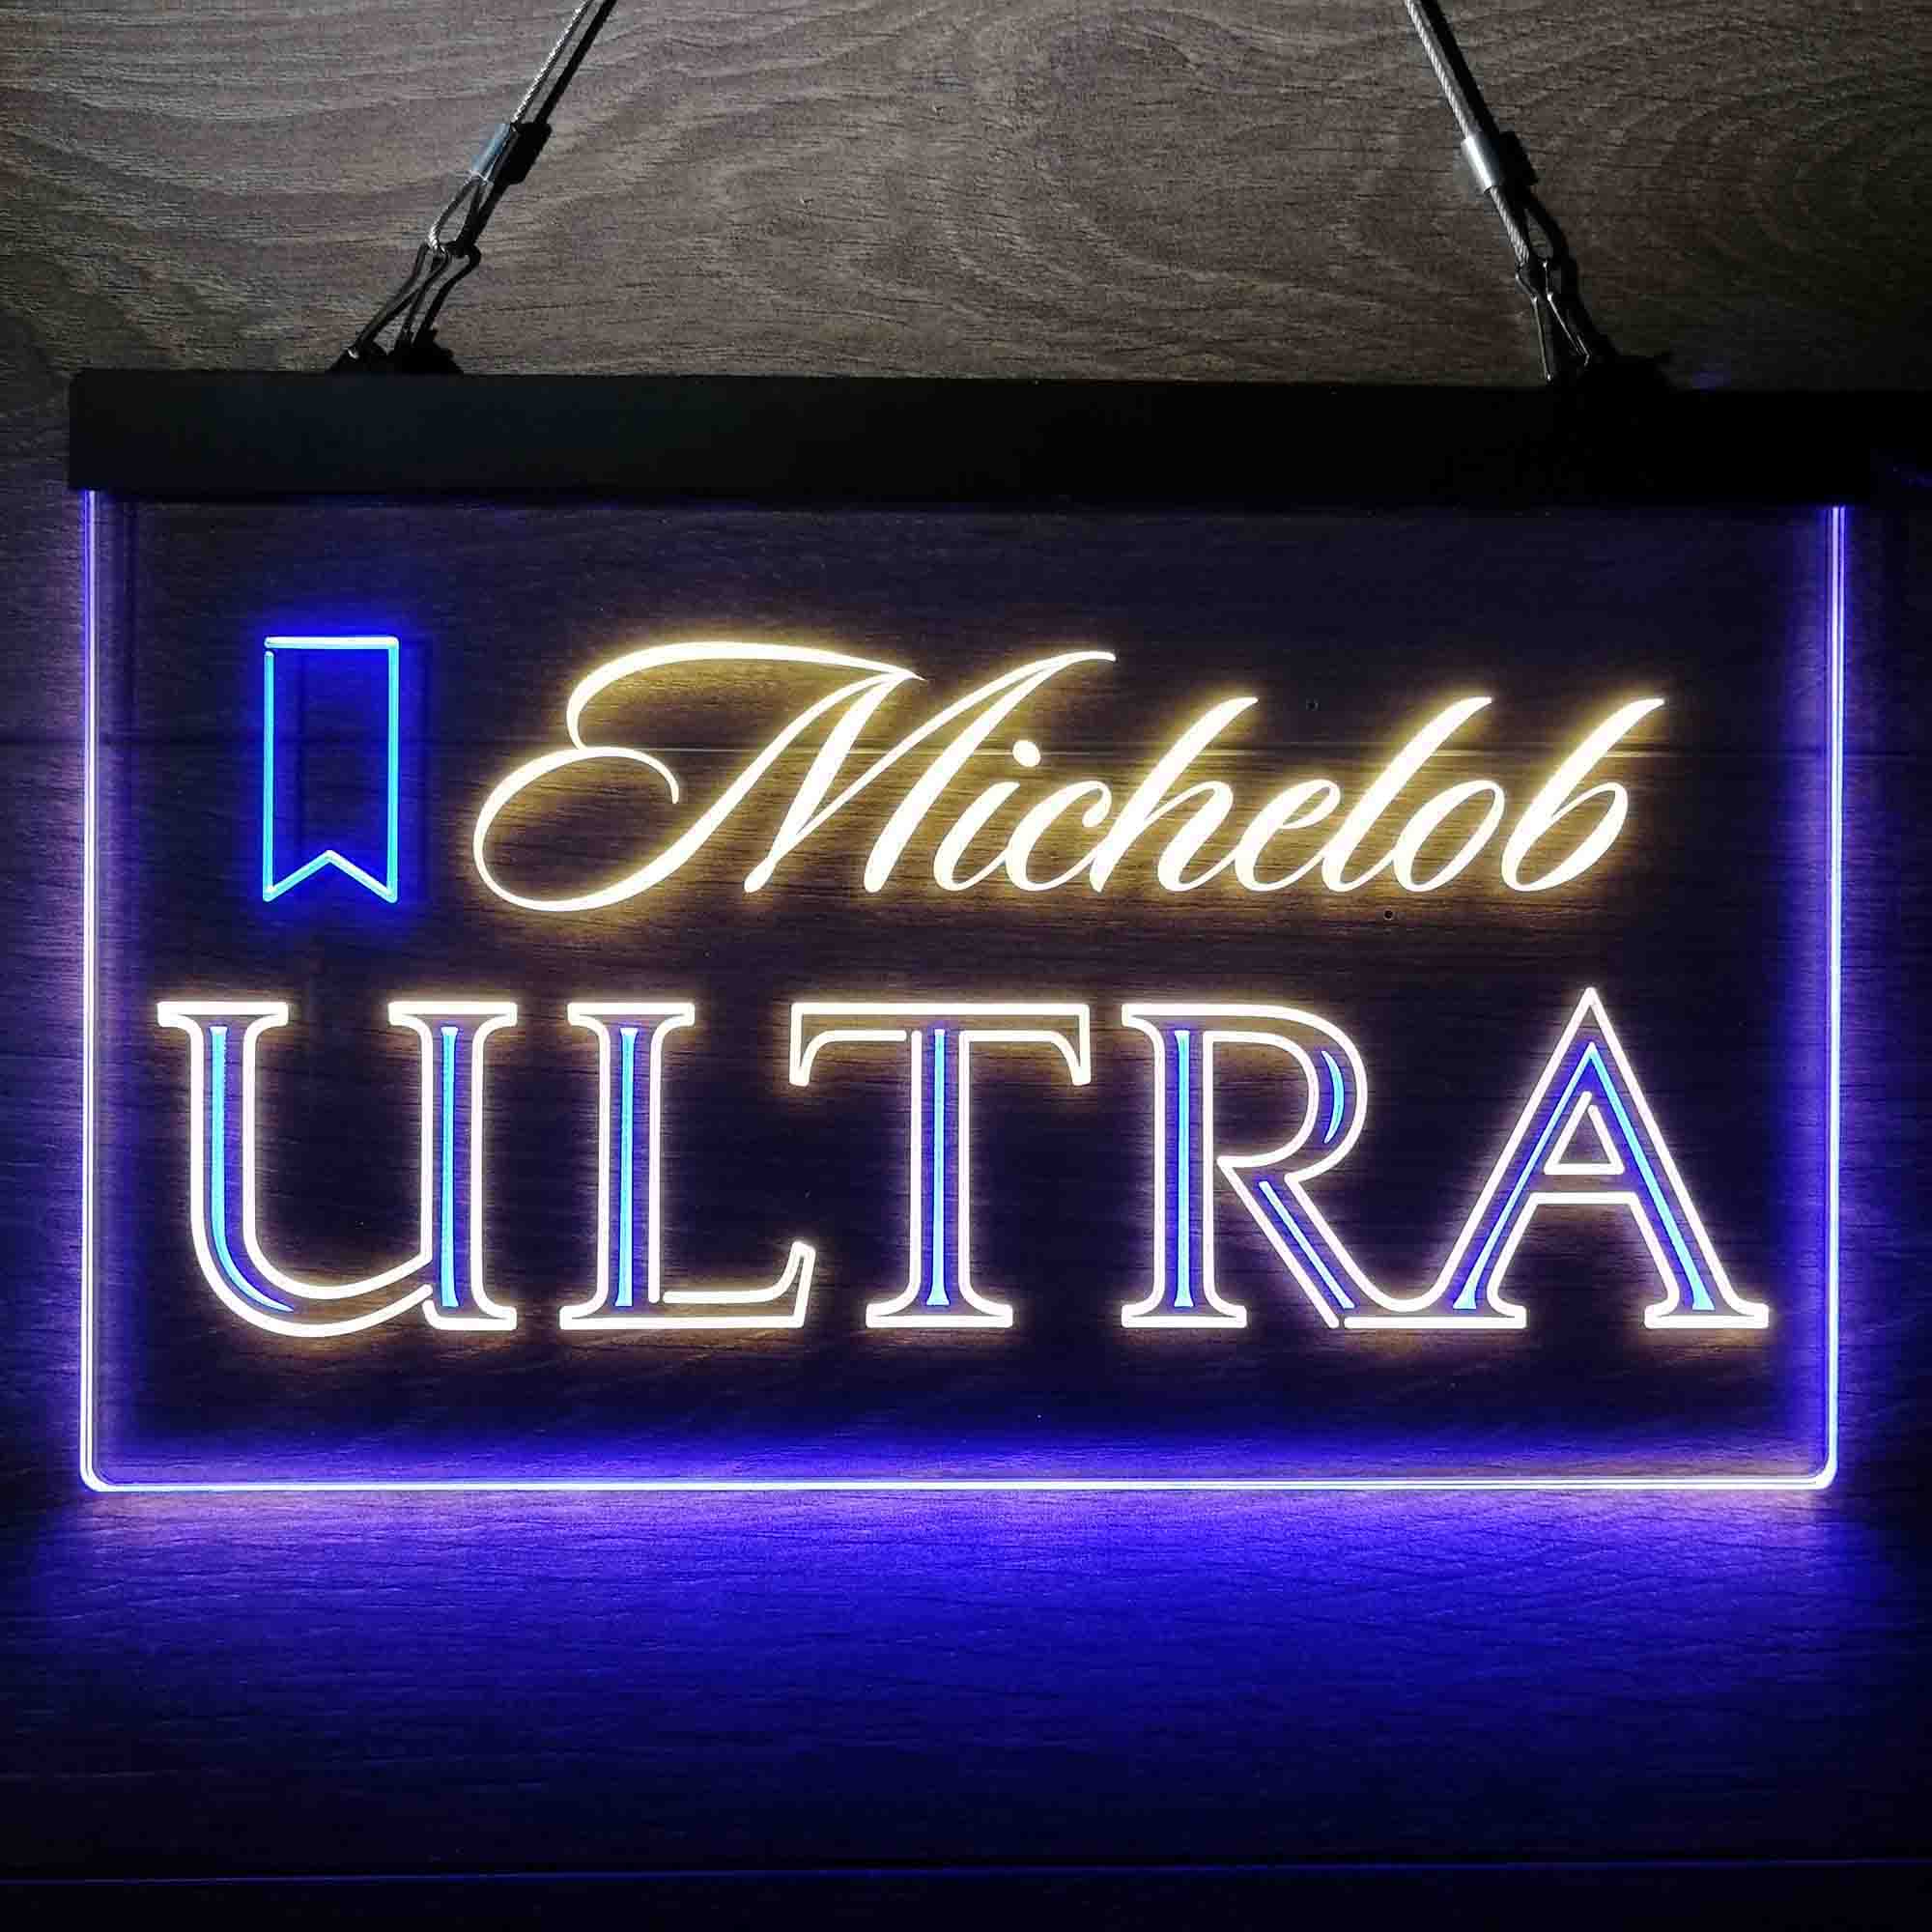 Michelob Ultra Beer Neon-Like LED Sign